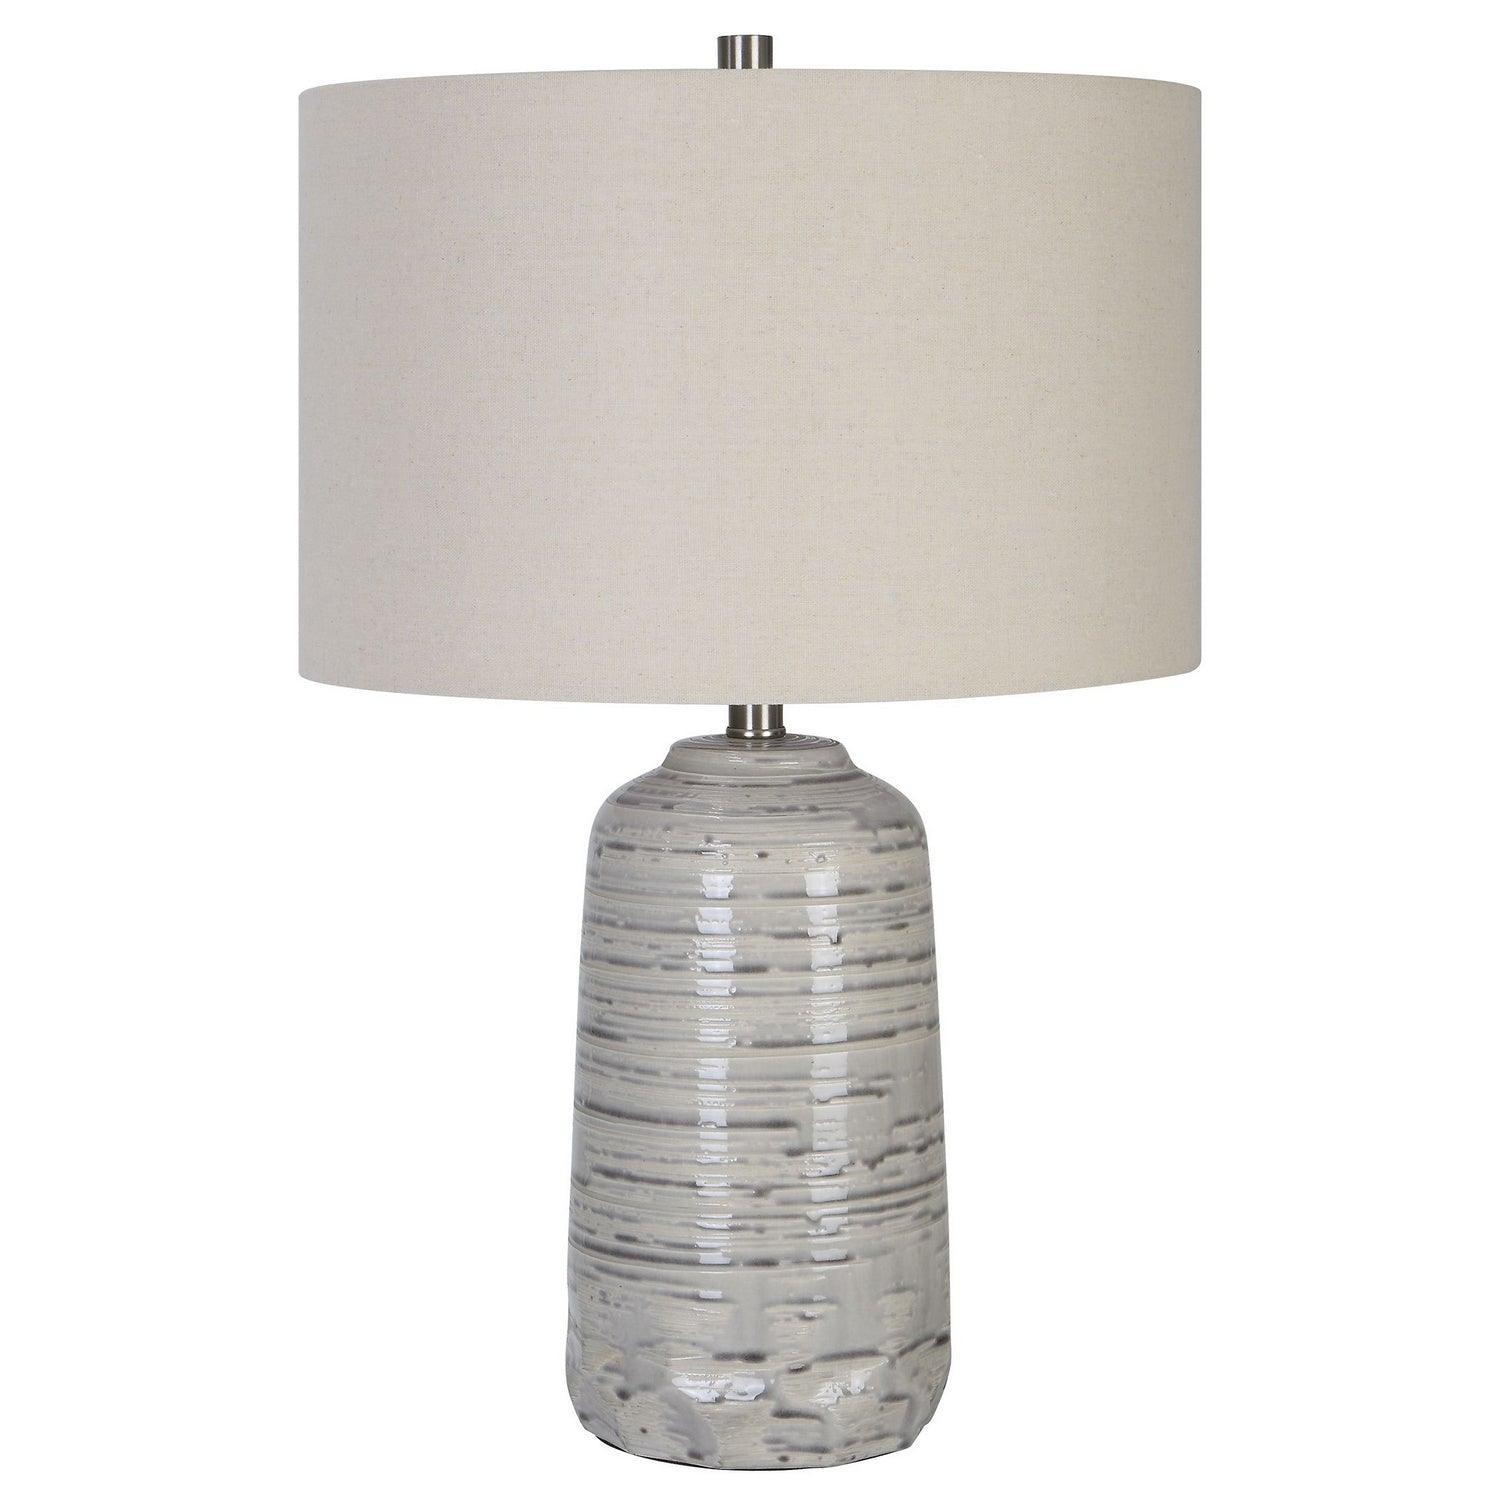 The Uttermost - Cyclone Table Lamp - 30069-1 | Montreal Lighting & Hardware